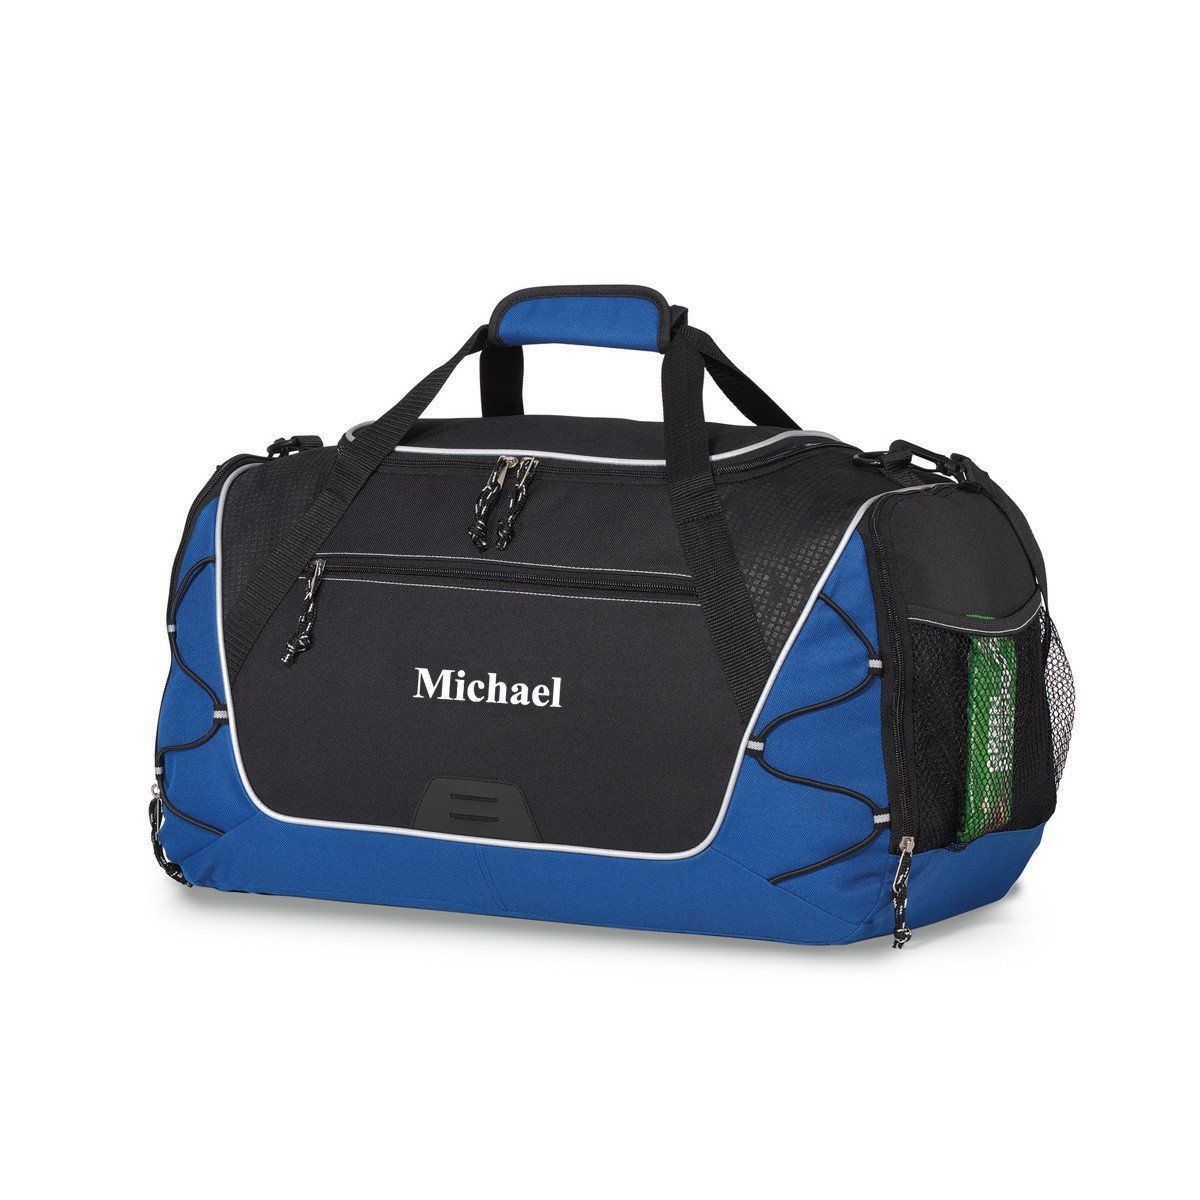 Personalized Sports Weekender Duffel and Gym Bag